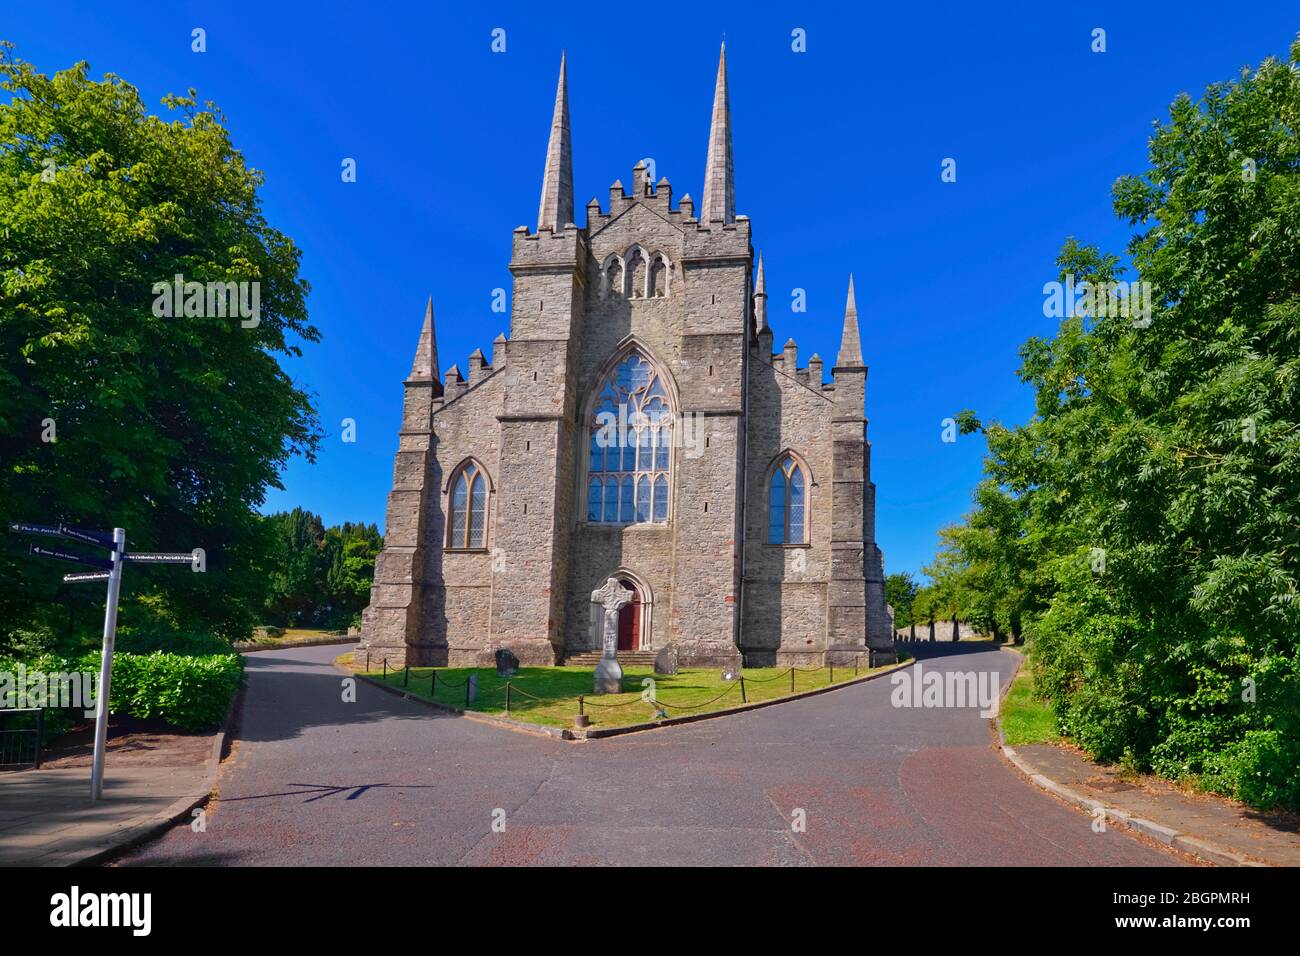 Ireland, County Down, Downpatrick, View from the east  of the Cathedral Church of the Holy Trinity also known as Down Cathedral, reputed burial place of St Patrick Ireland's patron saint. Stock Photo